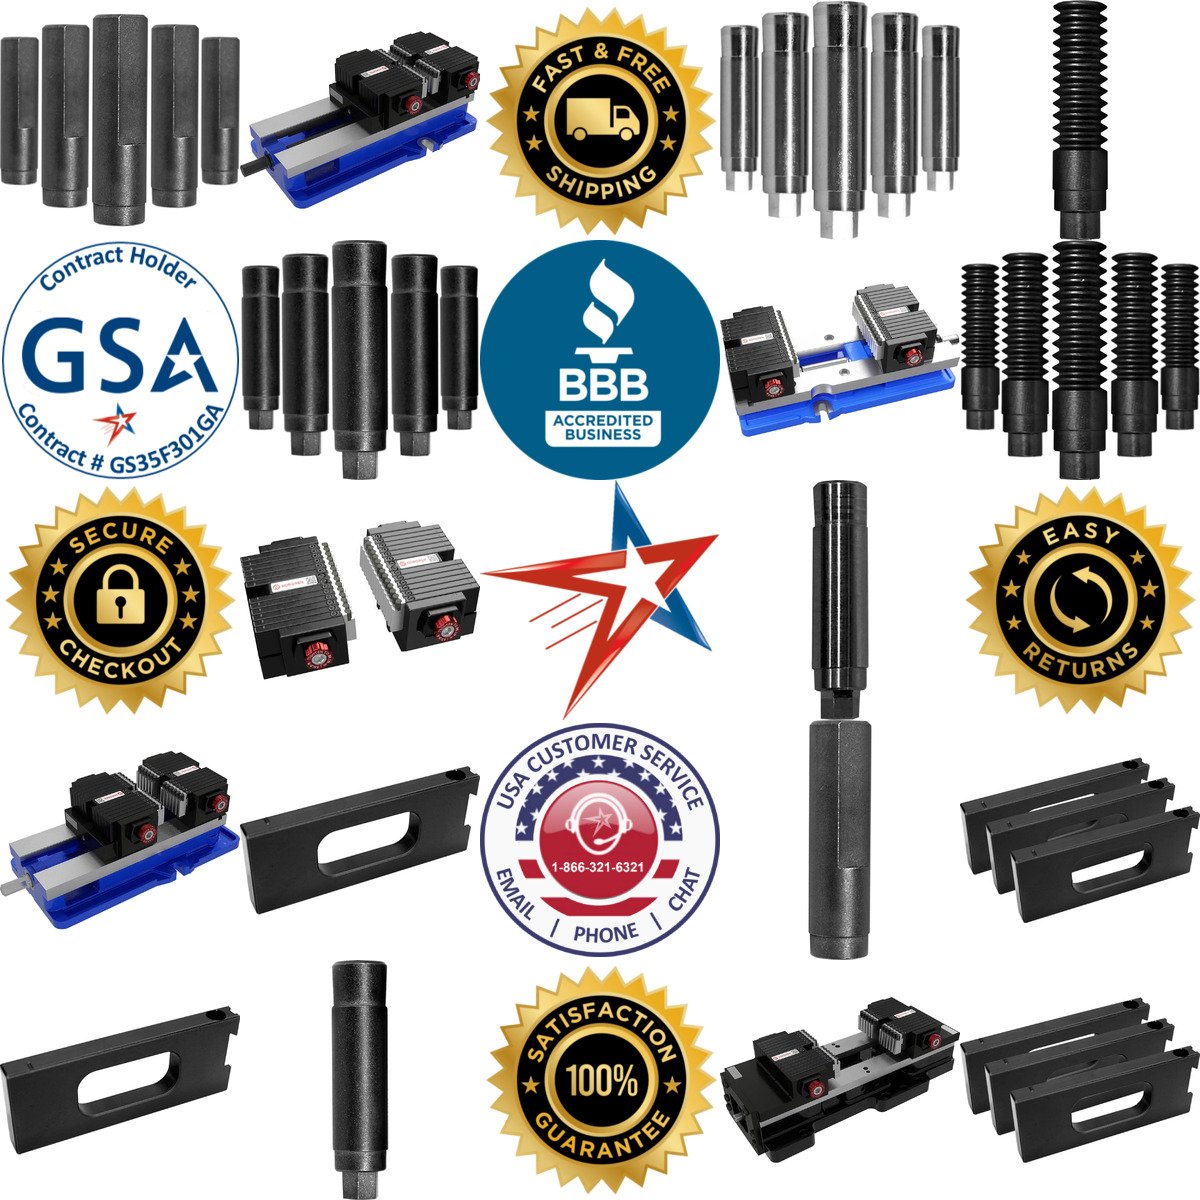 A selection of Adaptive Workholding Systems and Components products on GoVets